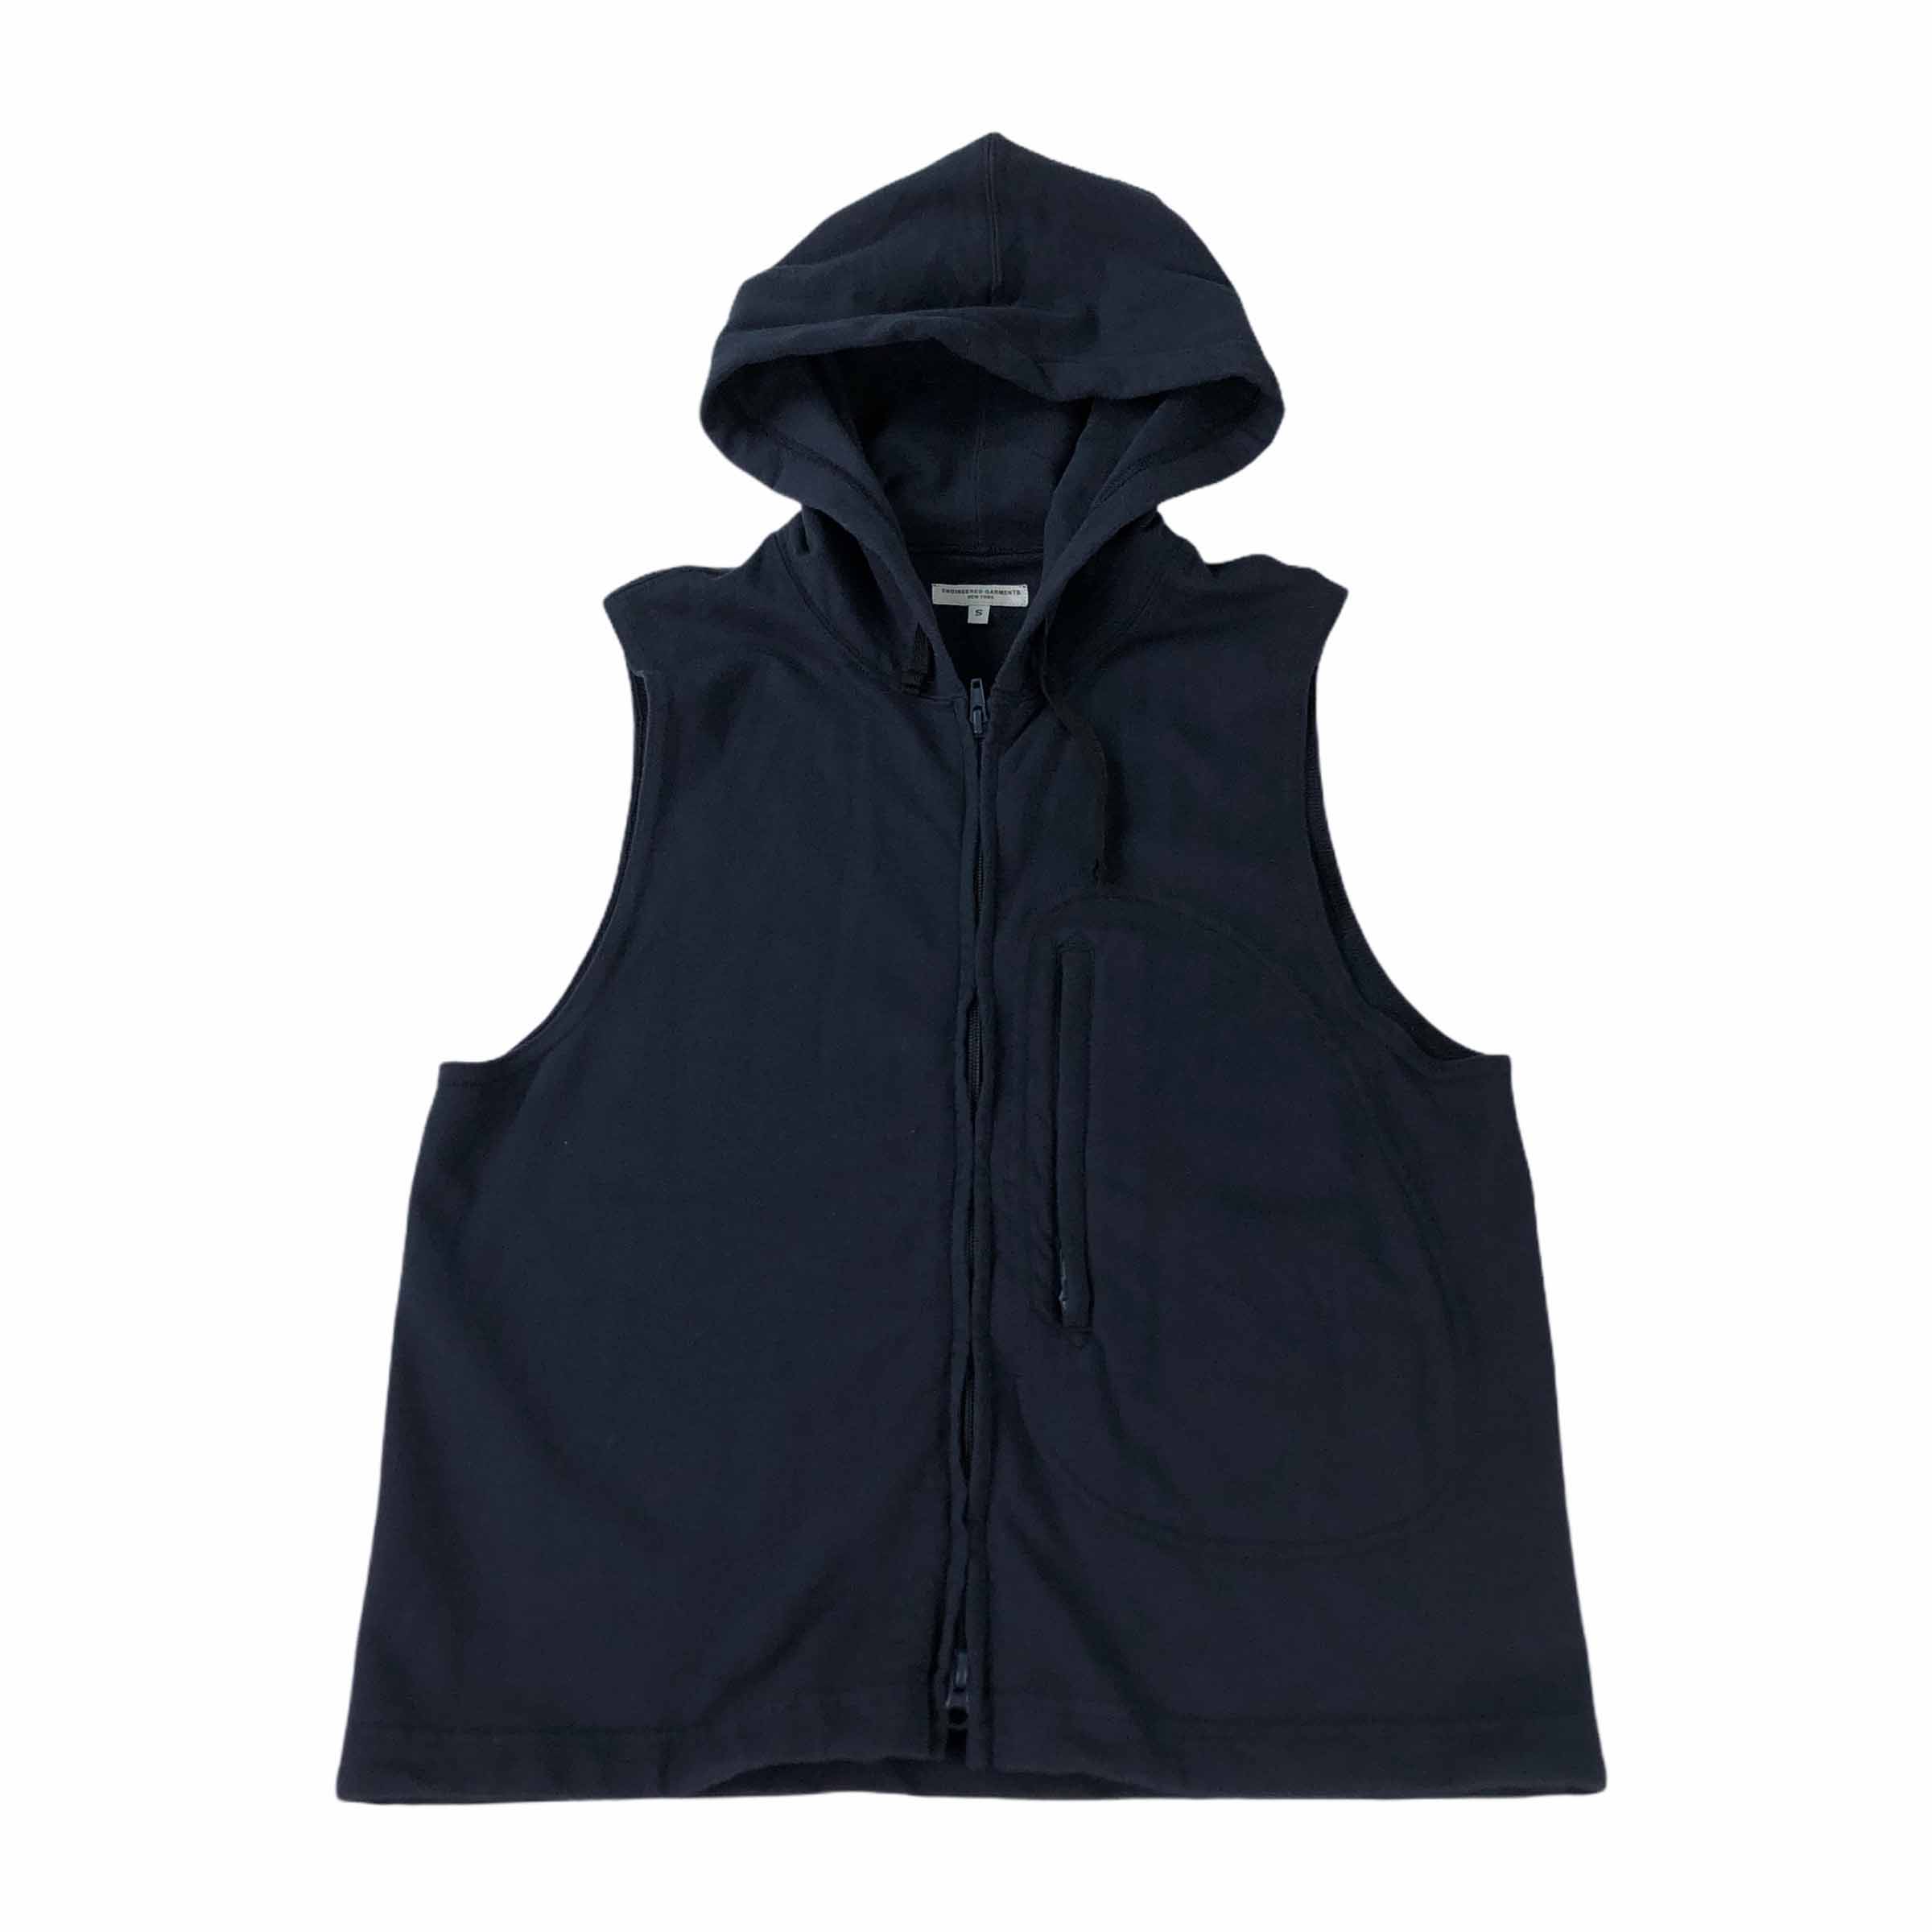 [Engineered Garments] Navy Vest with Hoodie - Size S